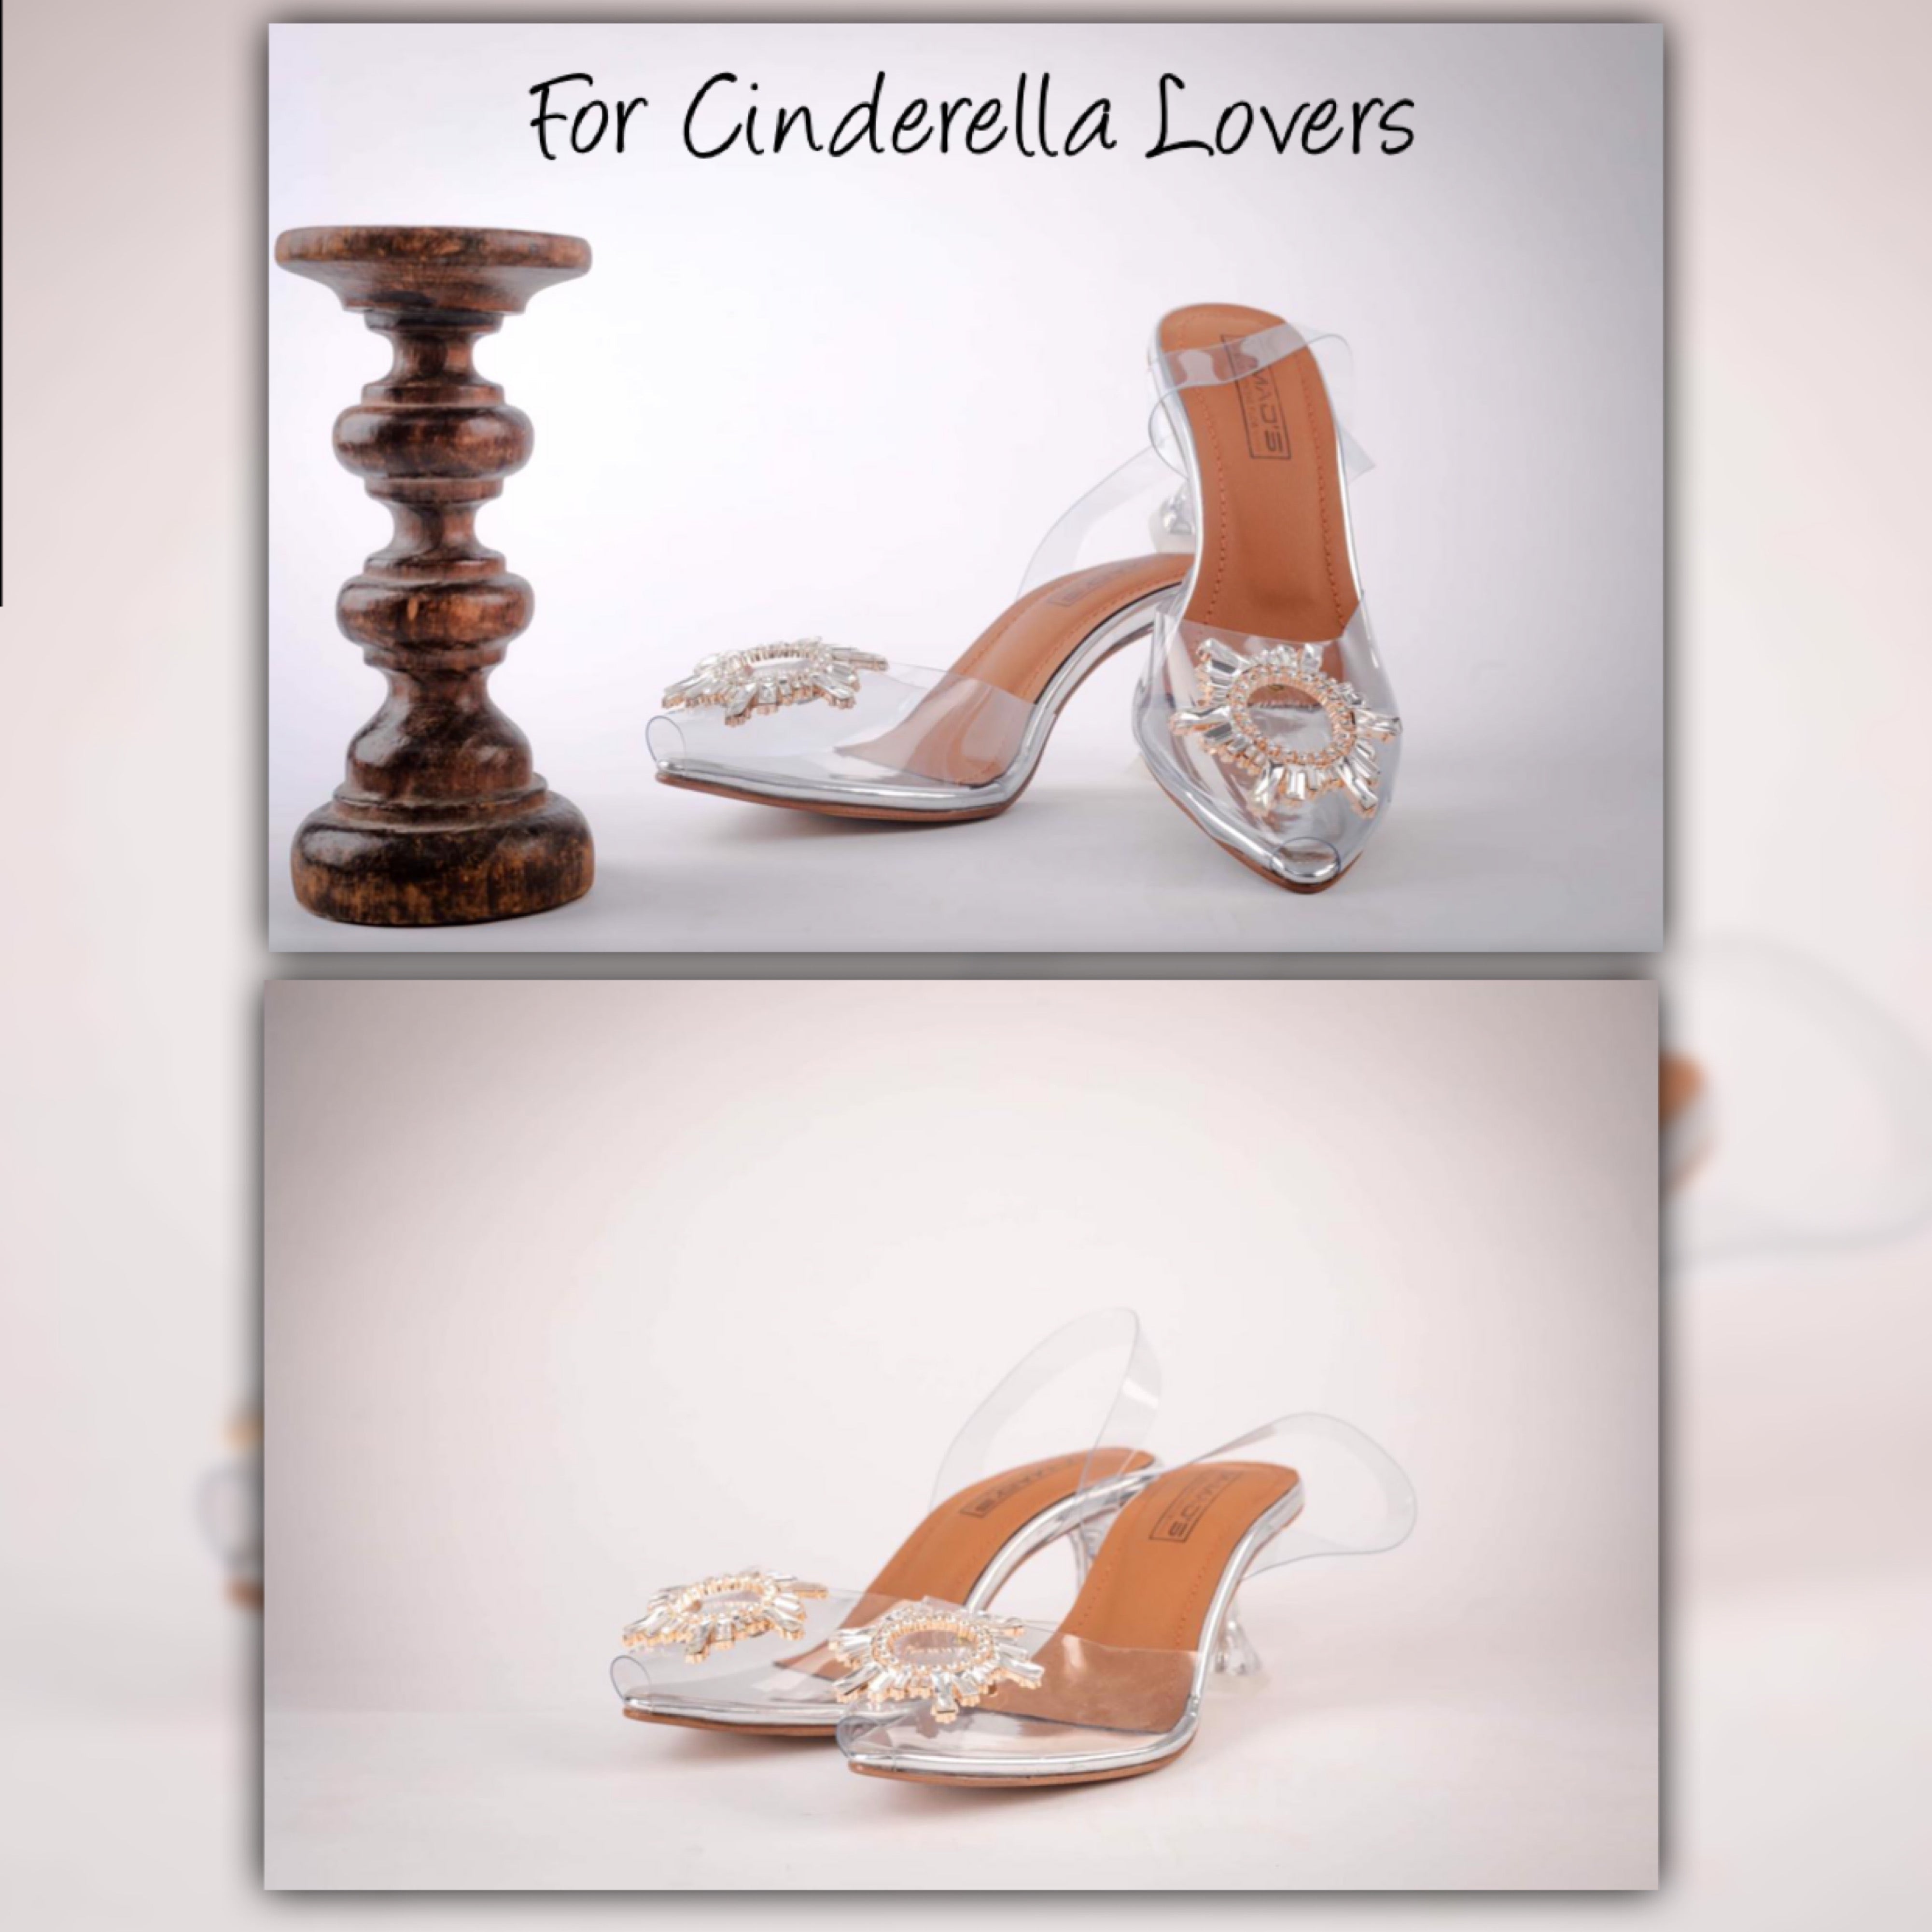 "Step into a fairytale with our enchanting Cinderella heels. These exquisite shoes are inspired by the timeless tale of Cinderella and designed to make you feel like a true princess. Crafted with utmost attention to detail, these heels feature a stunning 